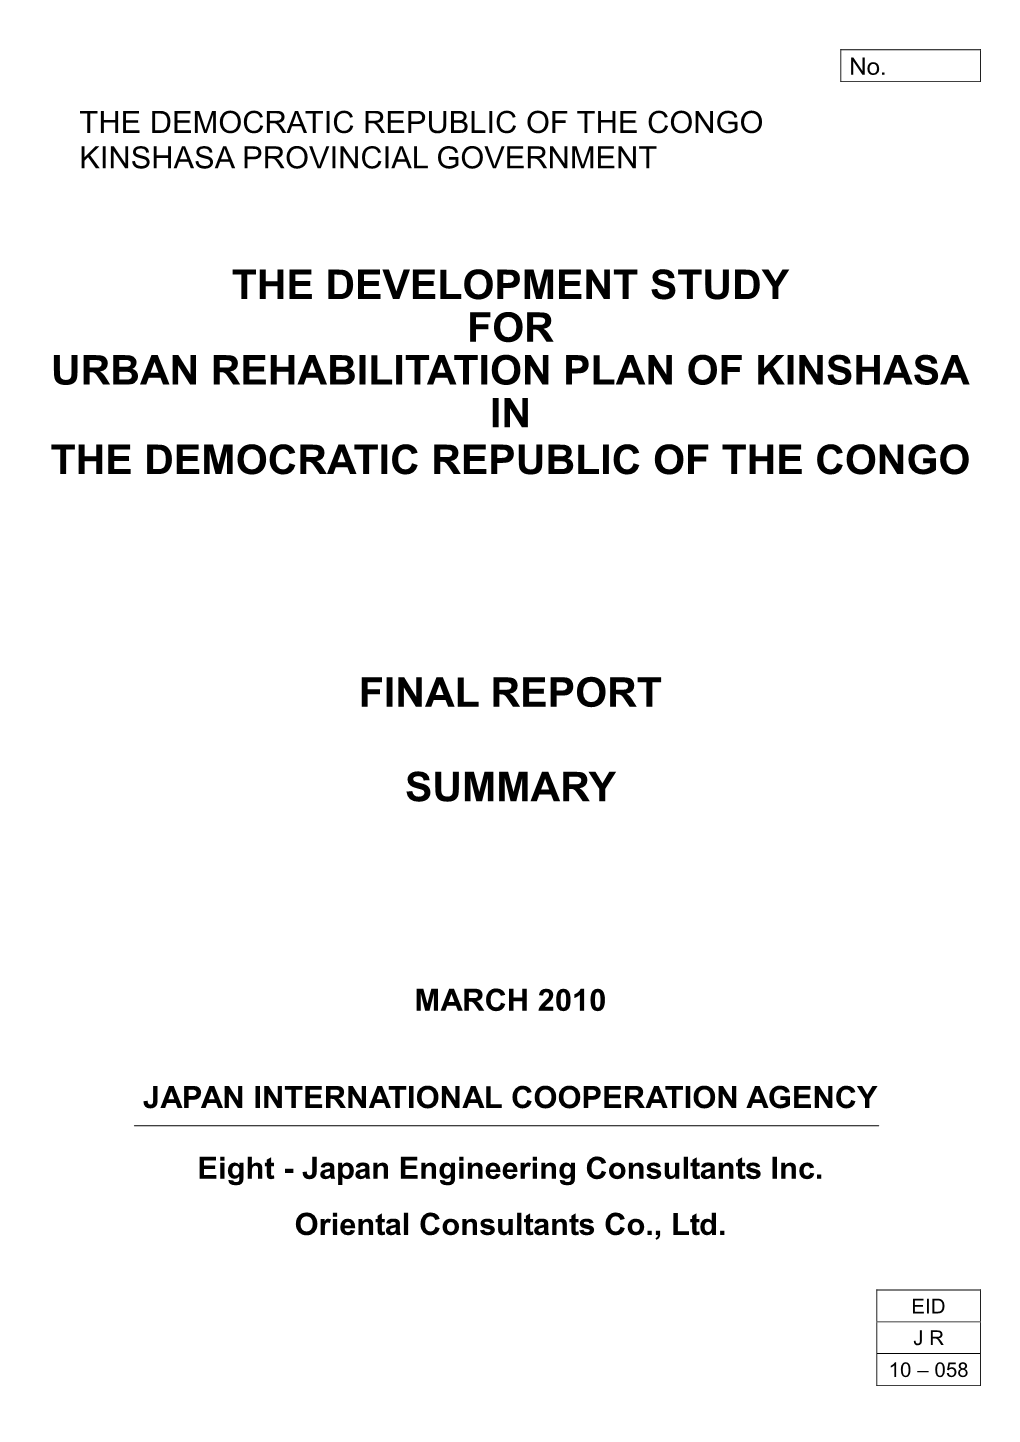 The Development Study for Urban Rehabilitation Plan of Kinshasa in the Democratic Republic of the Congo Final Report Summary, March 2010 Table of Contents